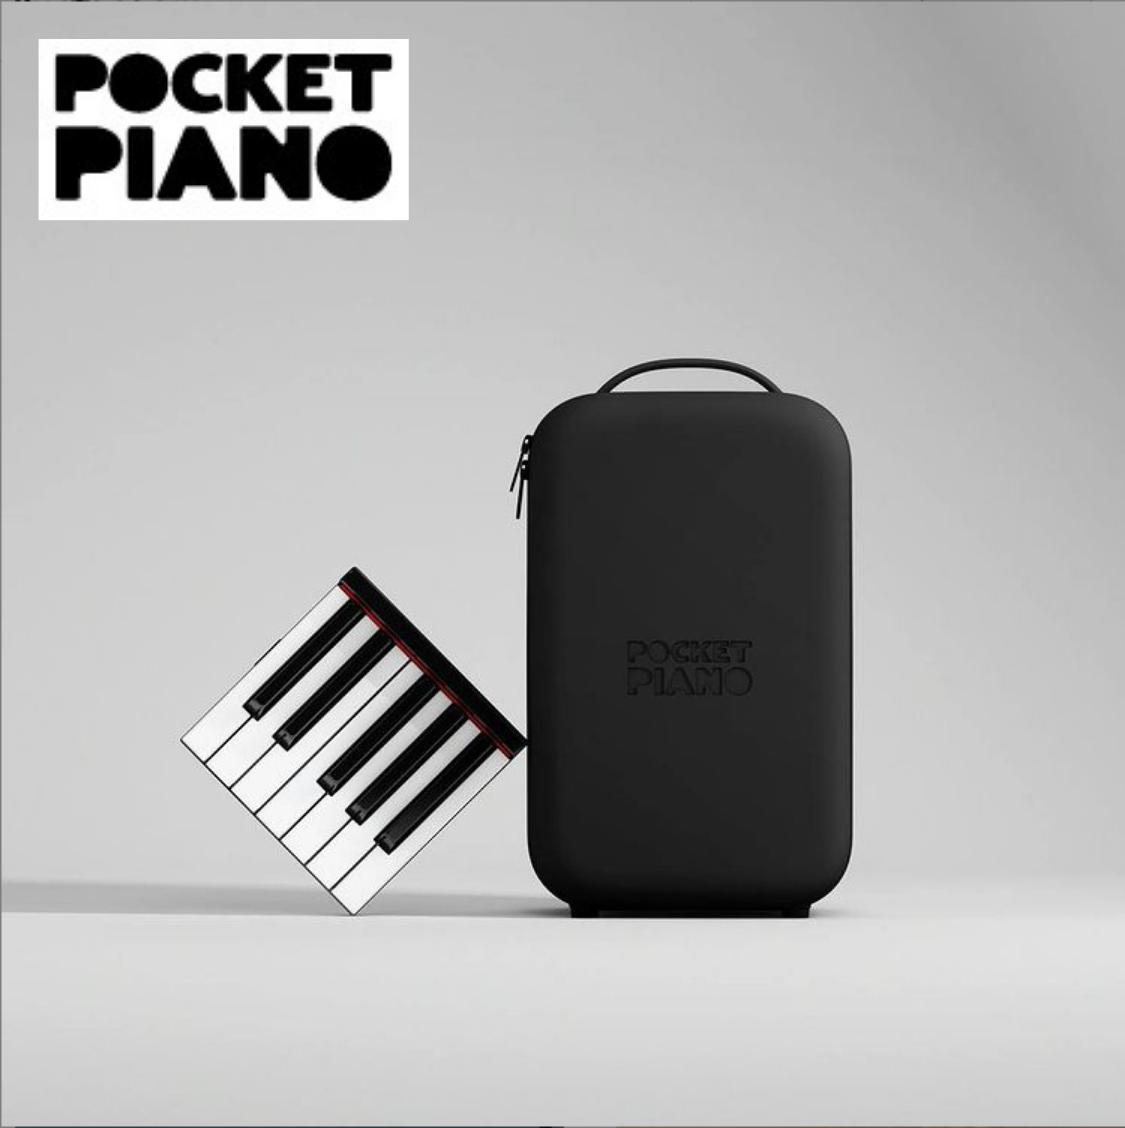 BUY Pocket Piano. ORDER YOURS, TODAY!